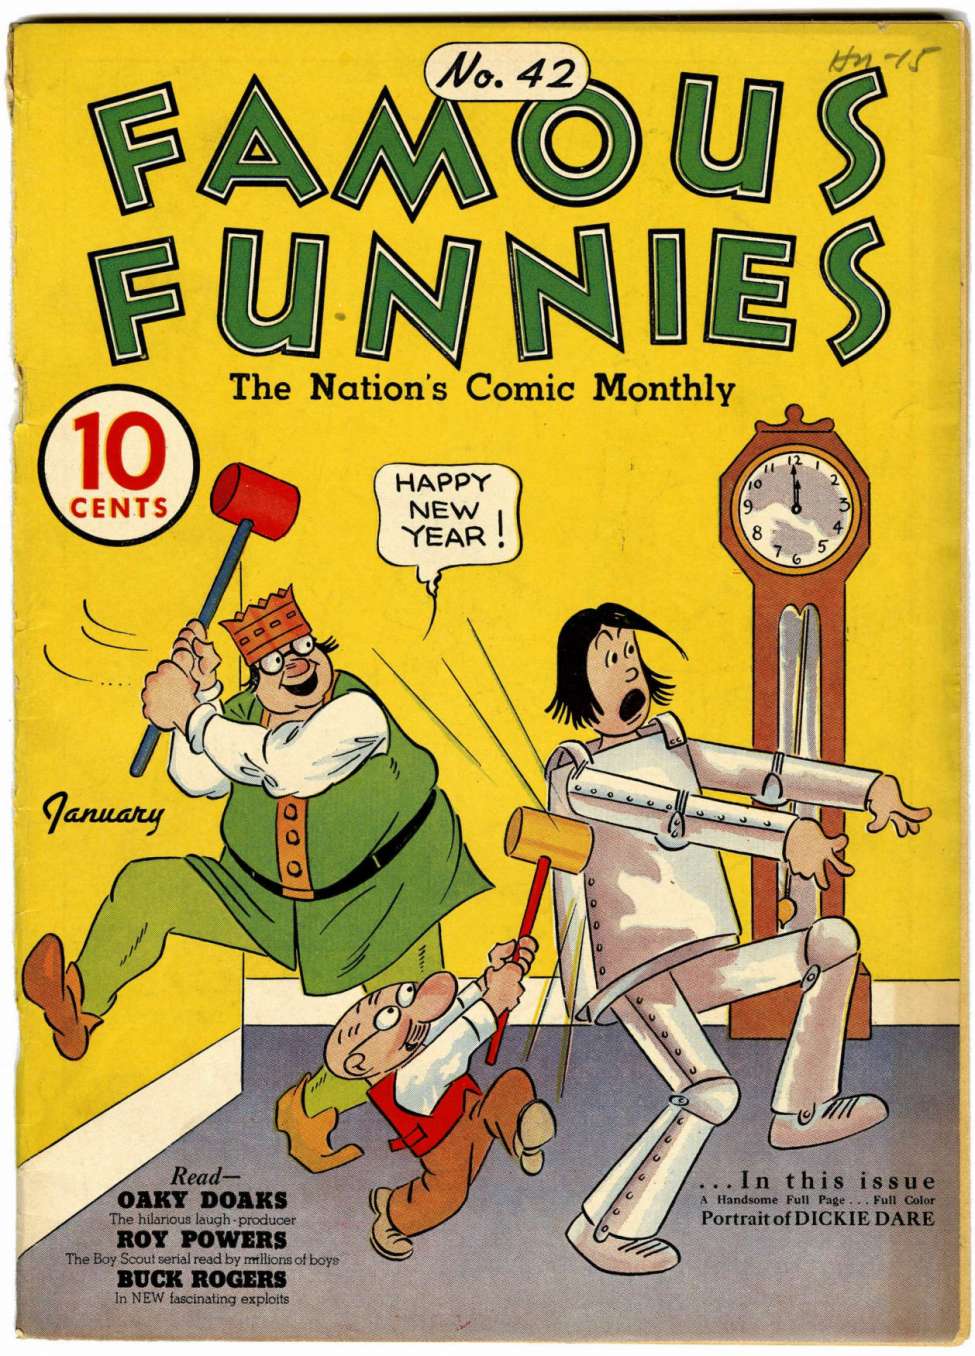 Book Cover For Famous Funnies 42 - Version 1